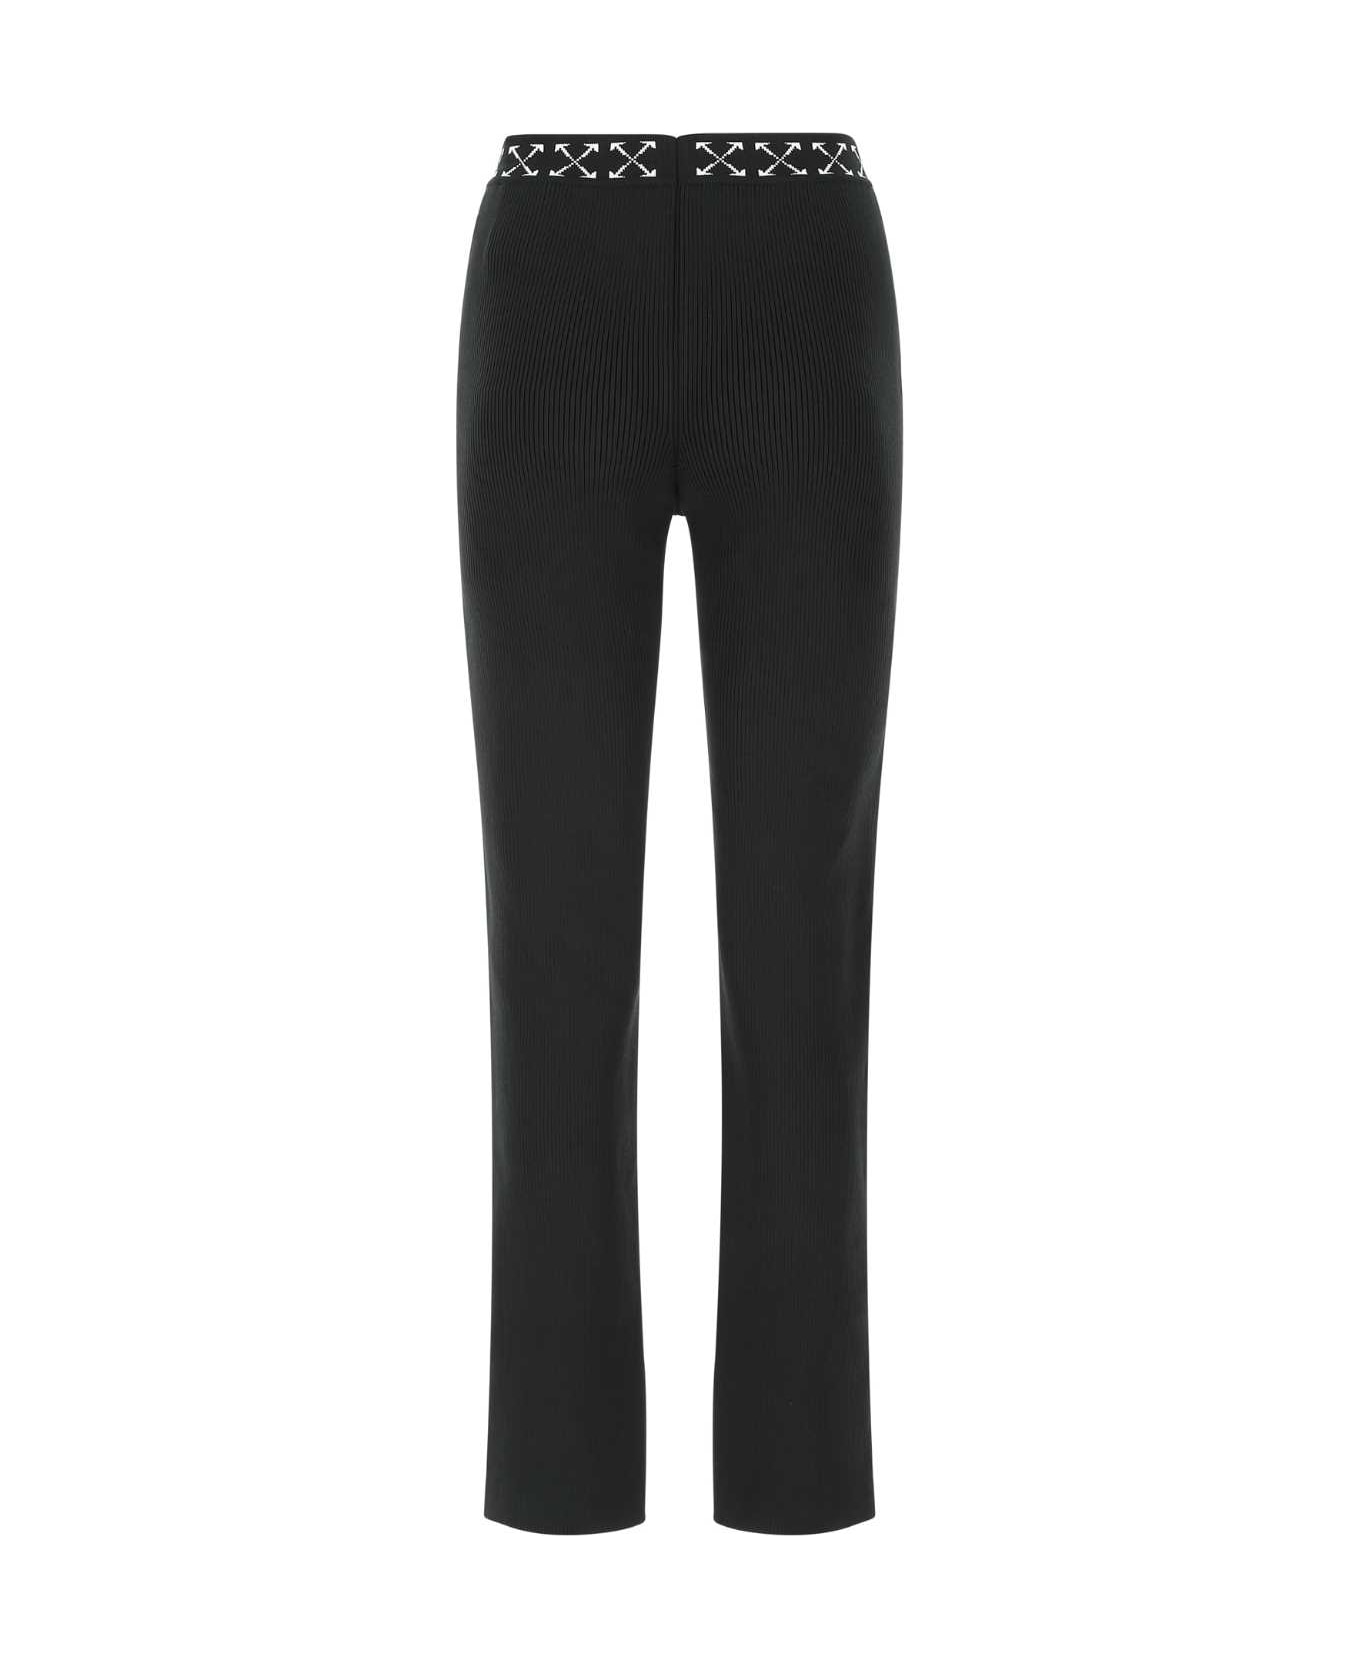 Off-White Black Stretch Polyester Blend Pant - 1001